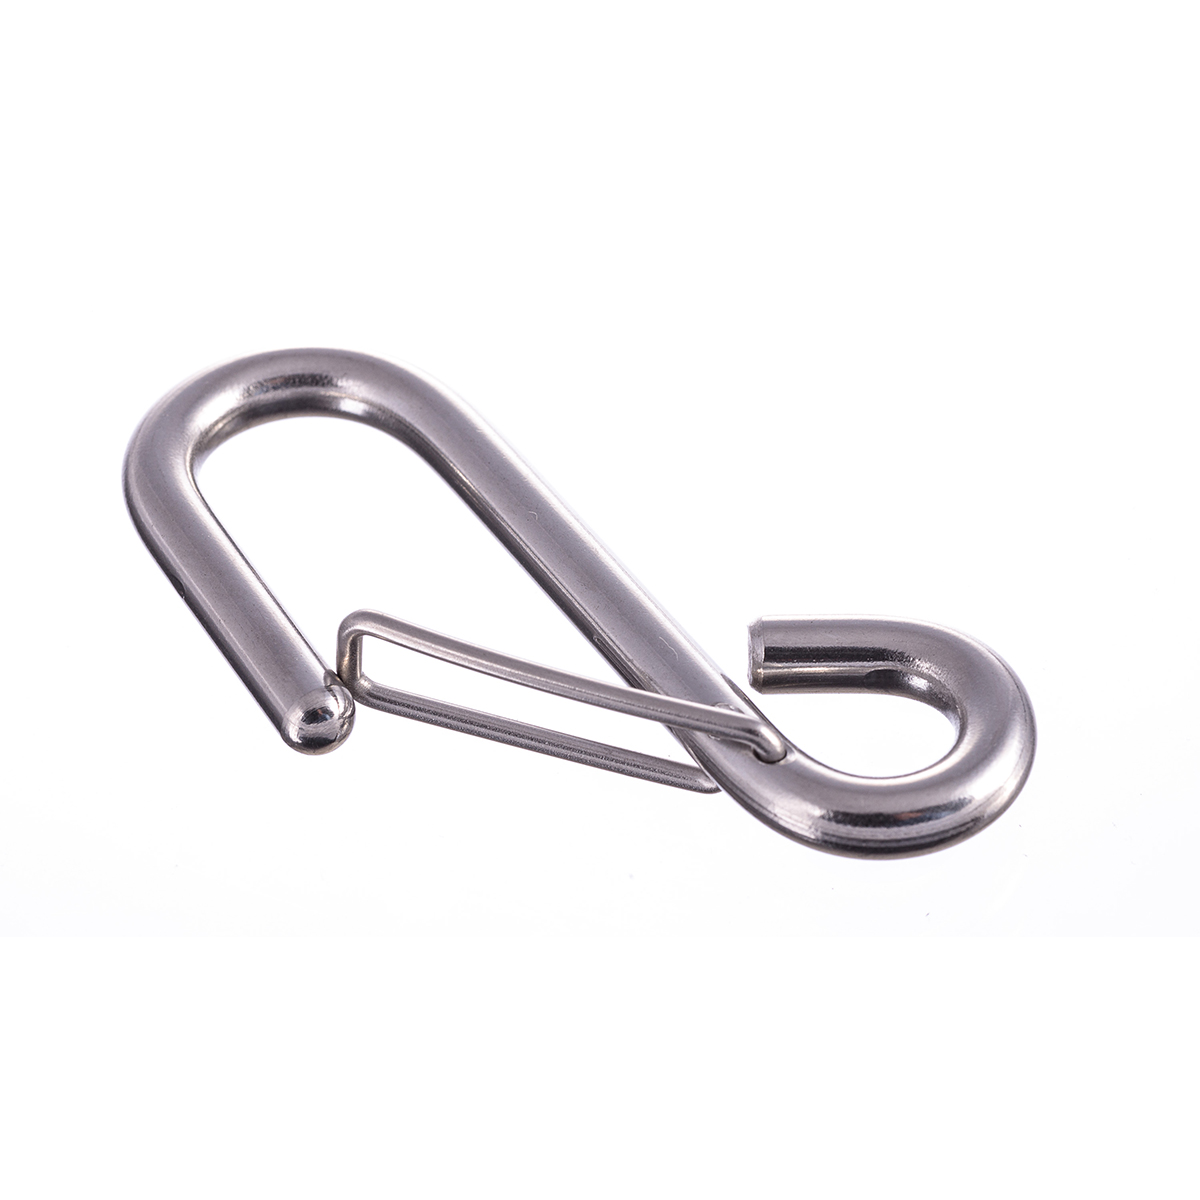 R8480T - Hook 5mm & Spring Retainer s/s (Pk Size: 50)